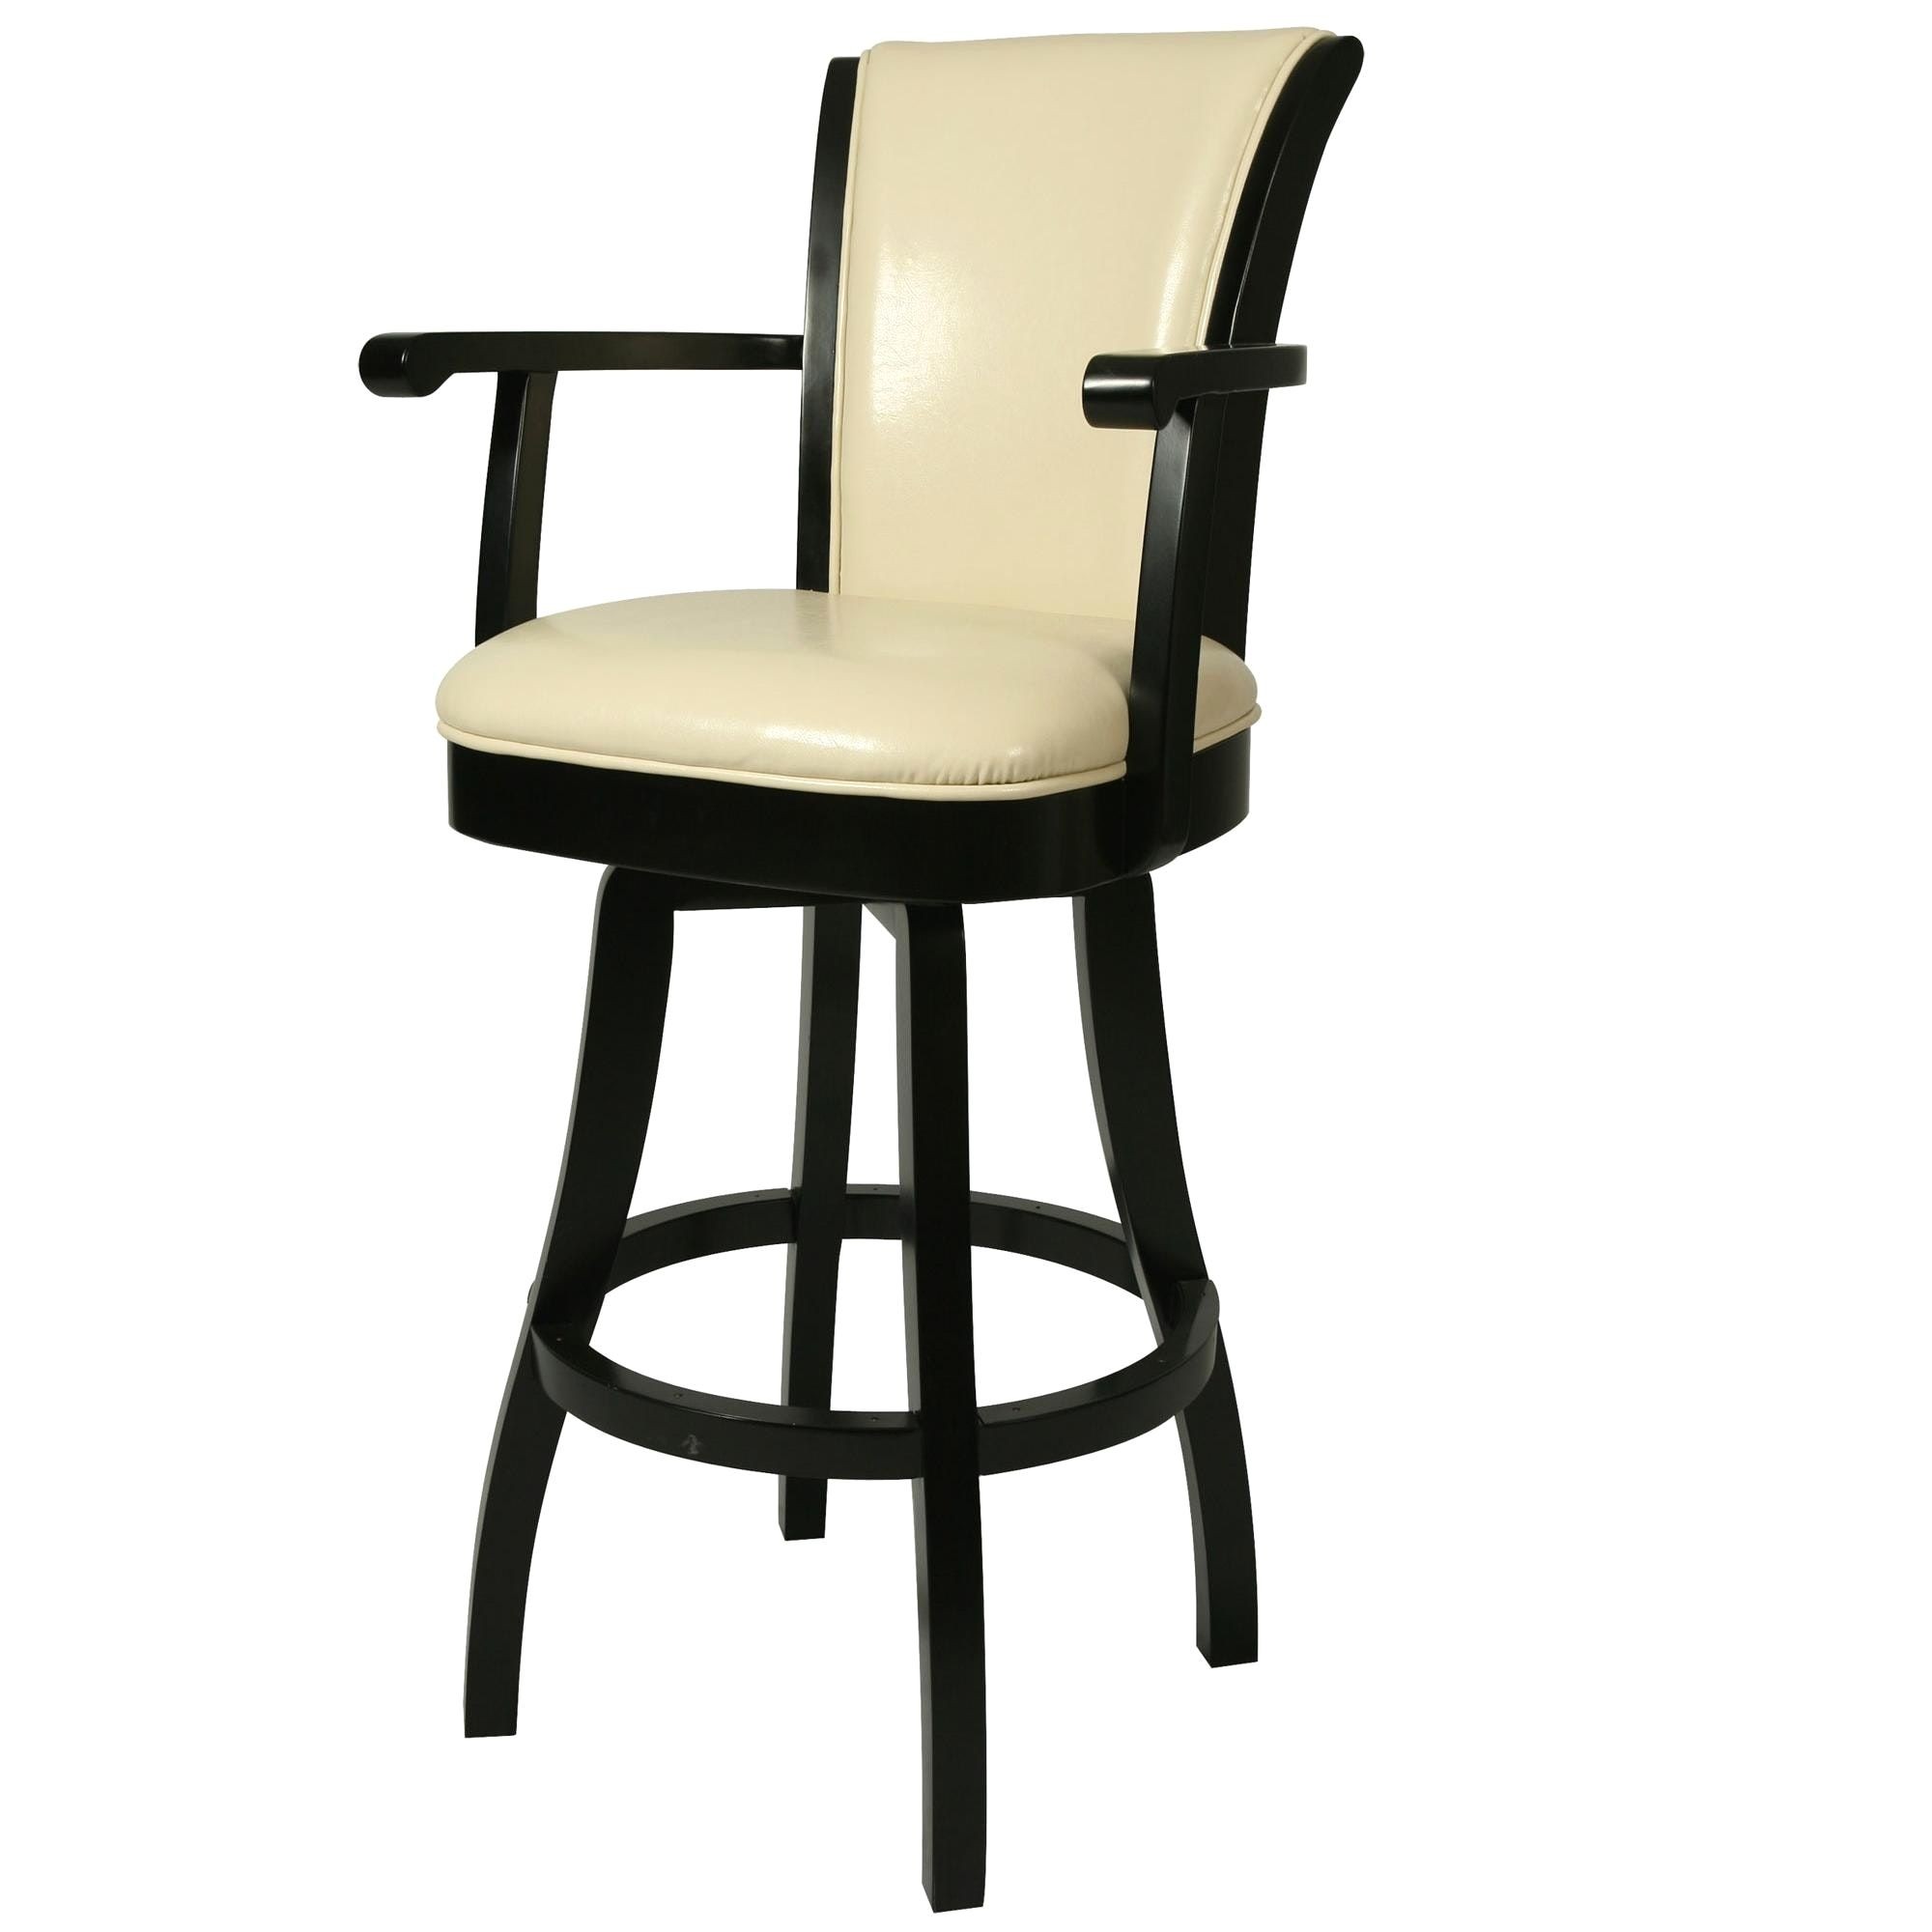 Glenwood 26 Leather Barstool With Arms Modern Bar Stools And Counter Stools